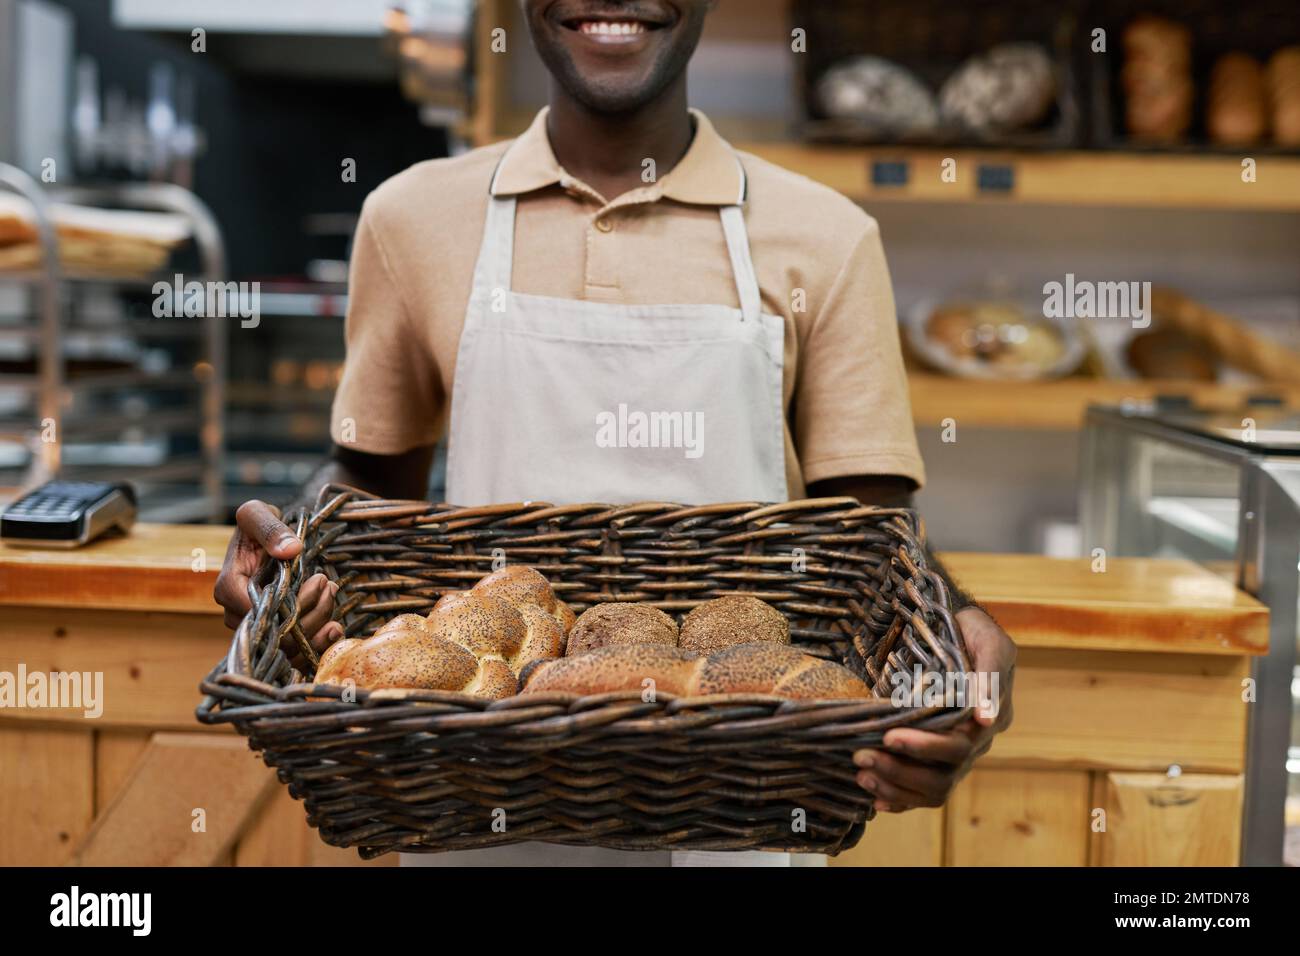 Positive baker holding basket of delicious bread loafs and buns Stock Photo